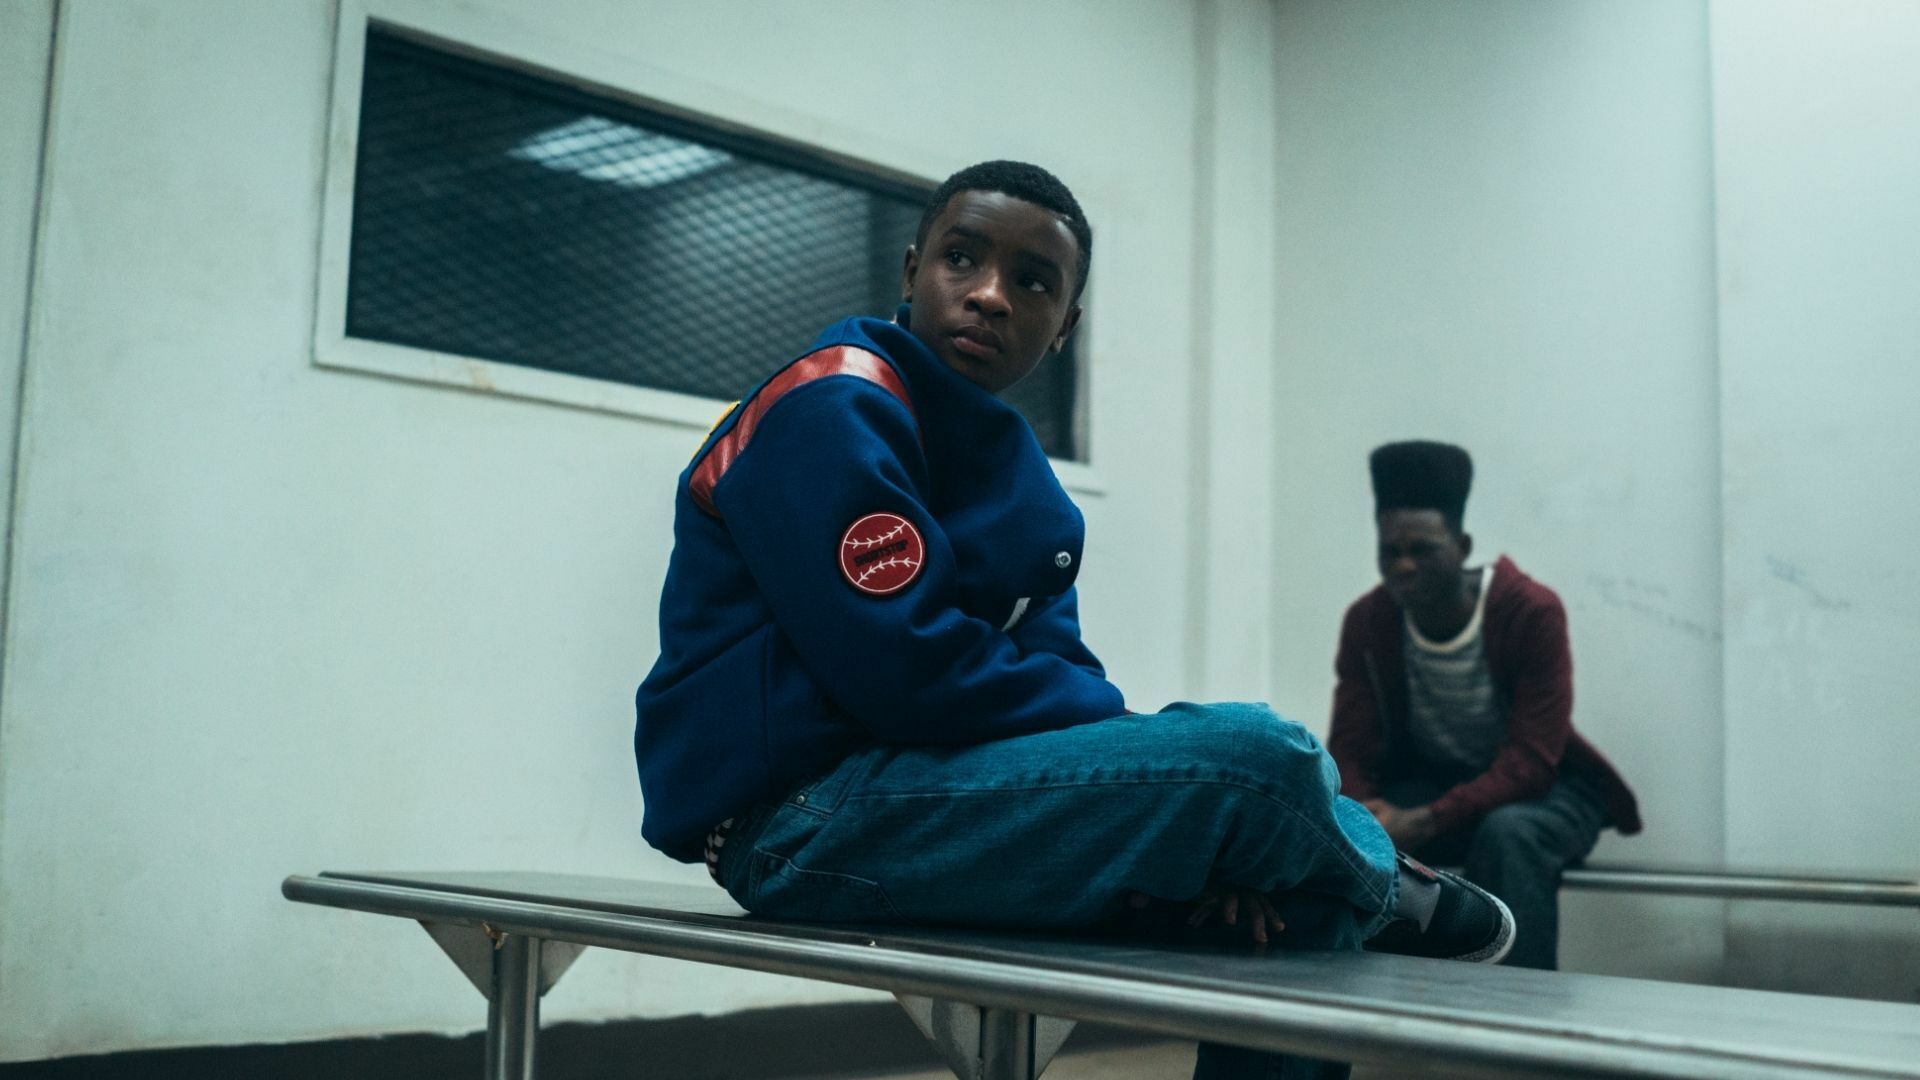 A young Black boy in a baseball jacket sits on a bench with another Black boy in the background, from "When They See Us"